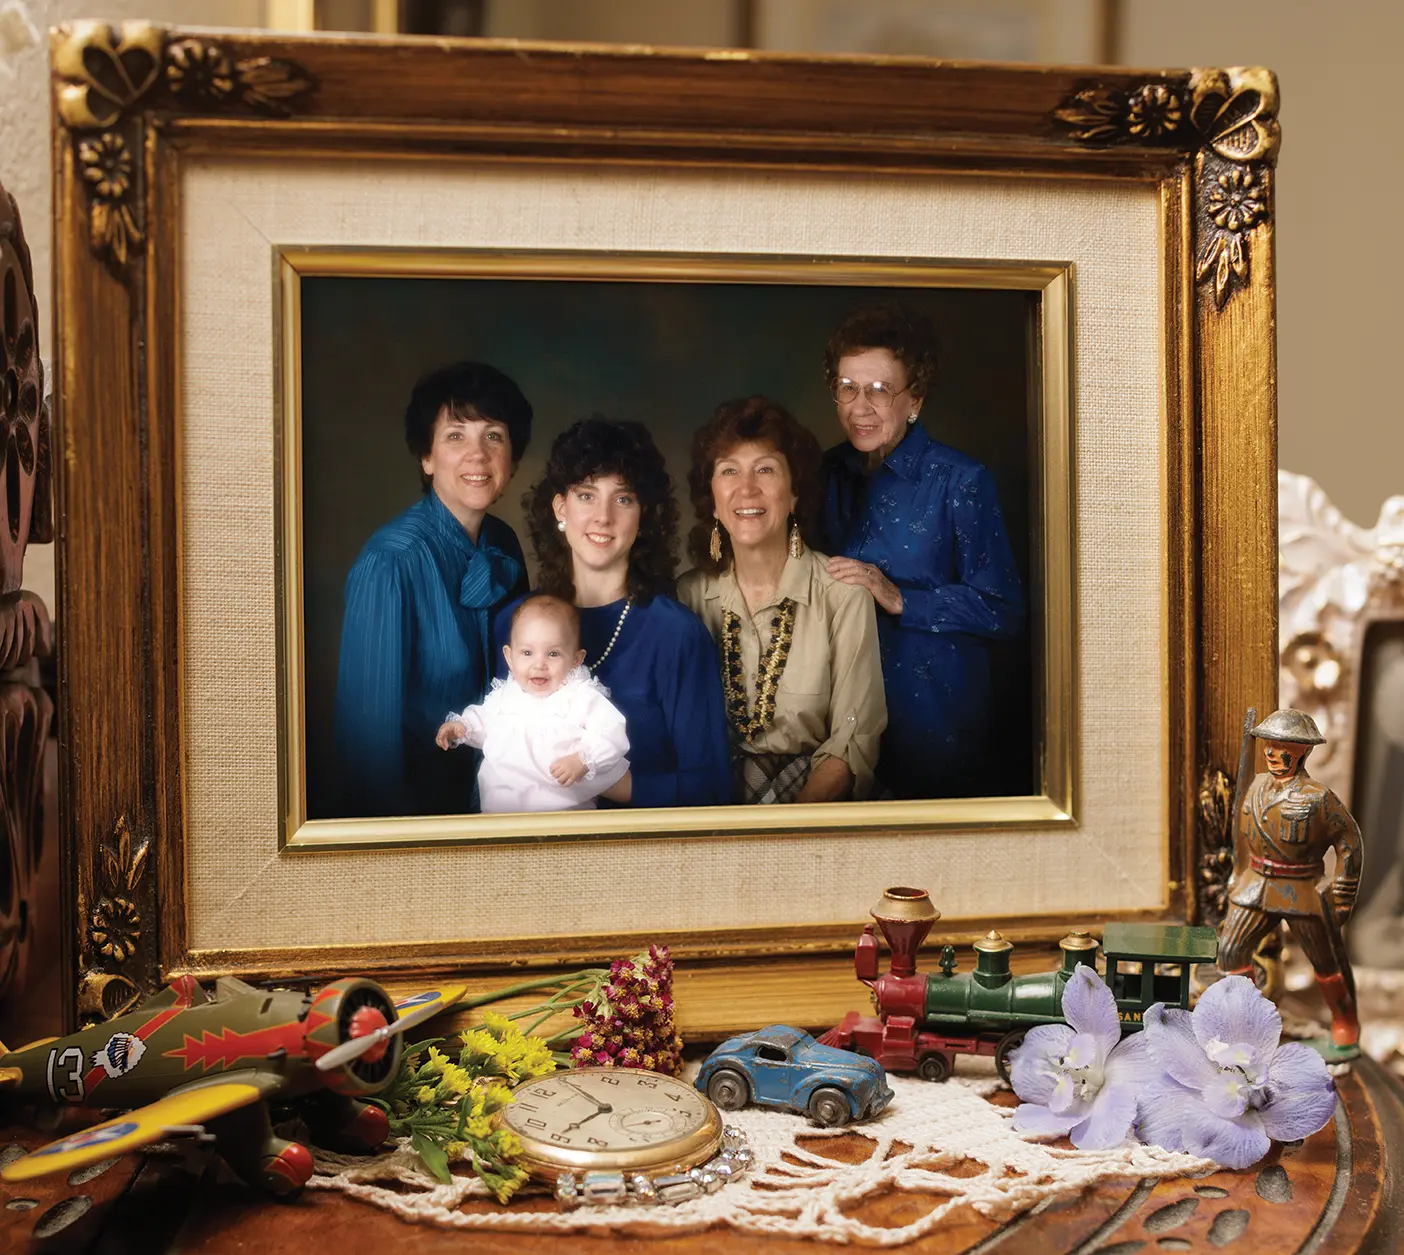 In an ornate, gilded picture frame set on a table, surrounded by various trinkets like a toy airplane and an old-fashioned stopwatch, four women and a baby, all part of the same family line, smile and pose in a photo.